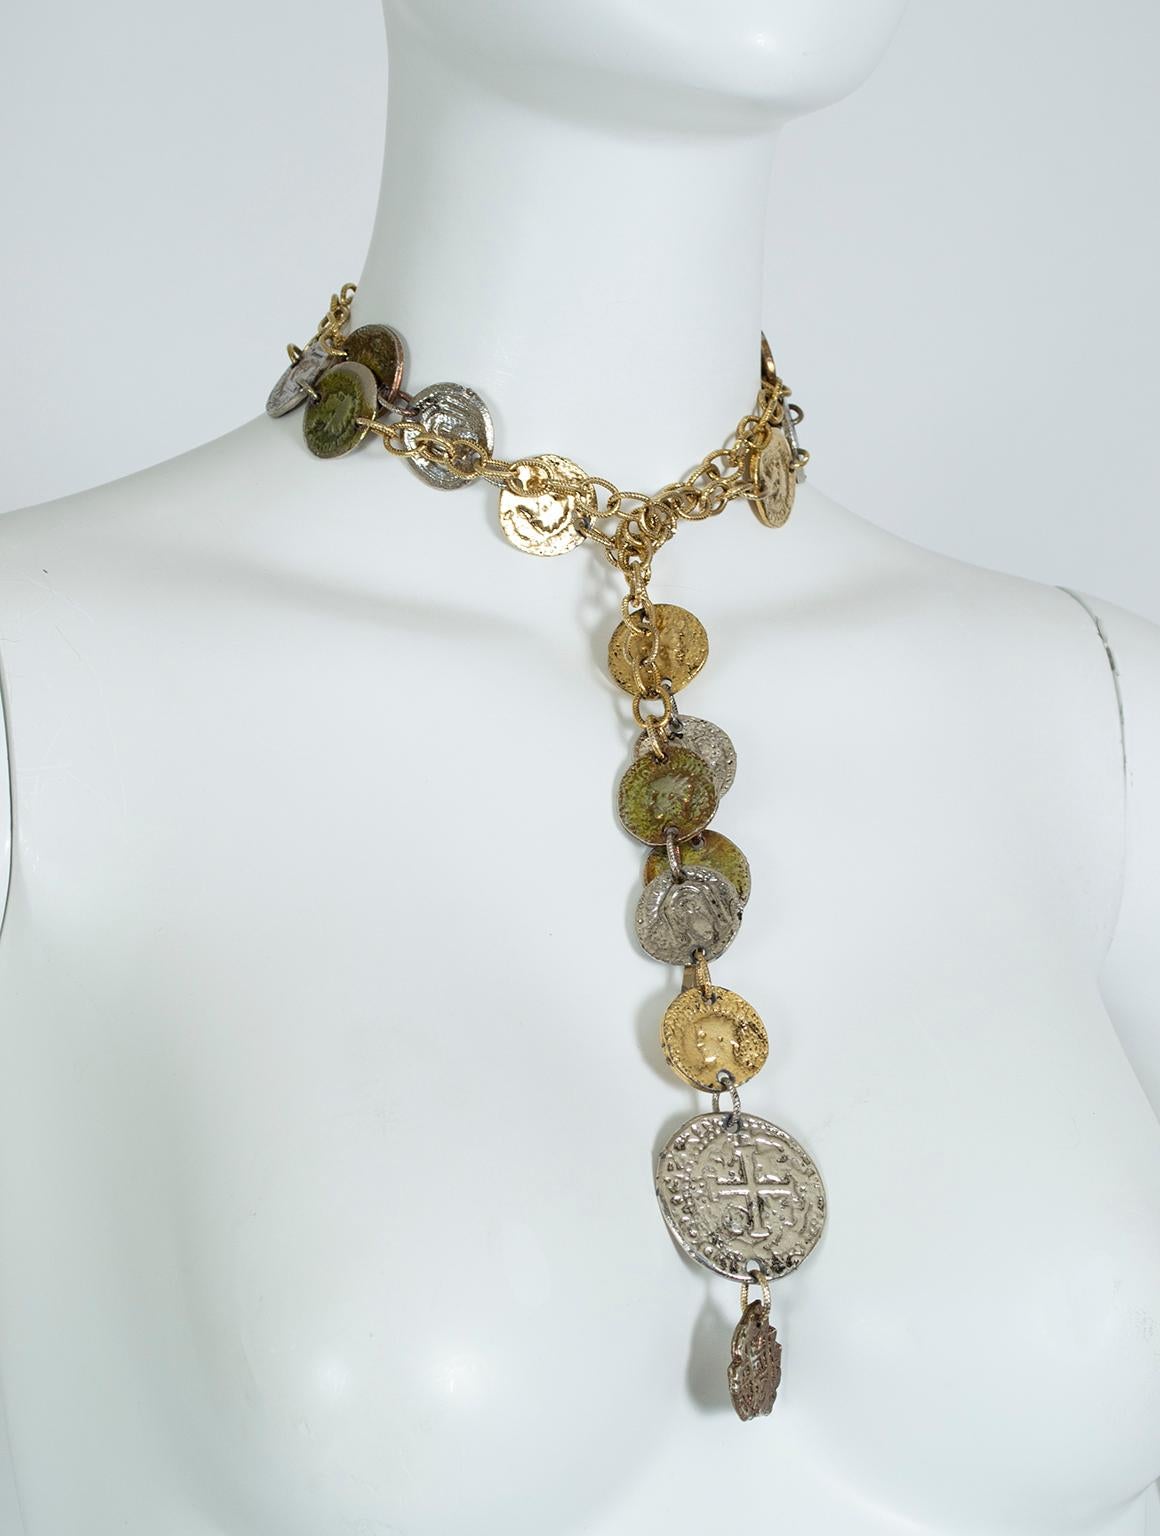 Gold Shipwreck Chain Belt with Heavyweight Embossed “Coins” – One Size, 1960s 1